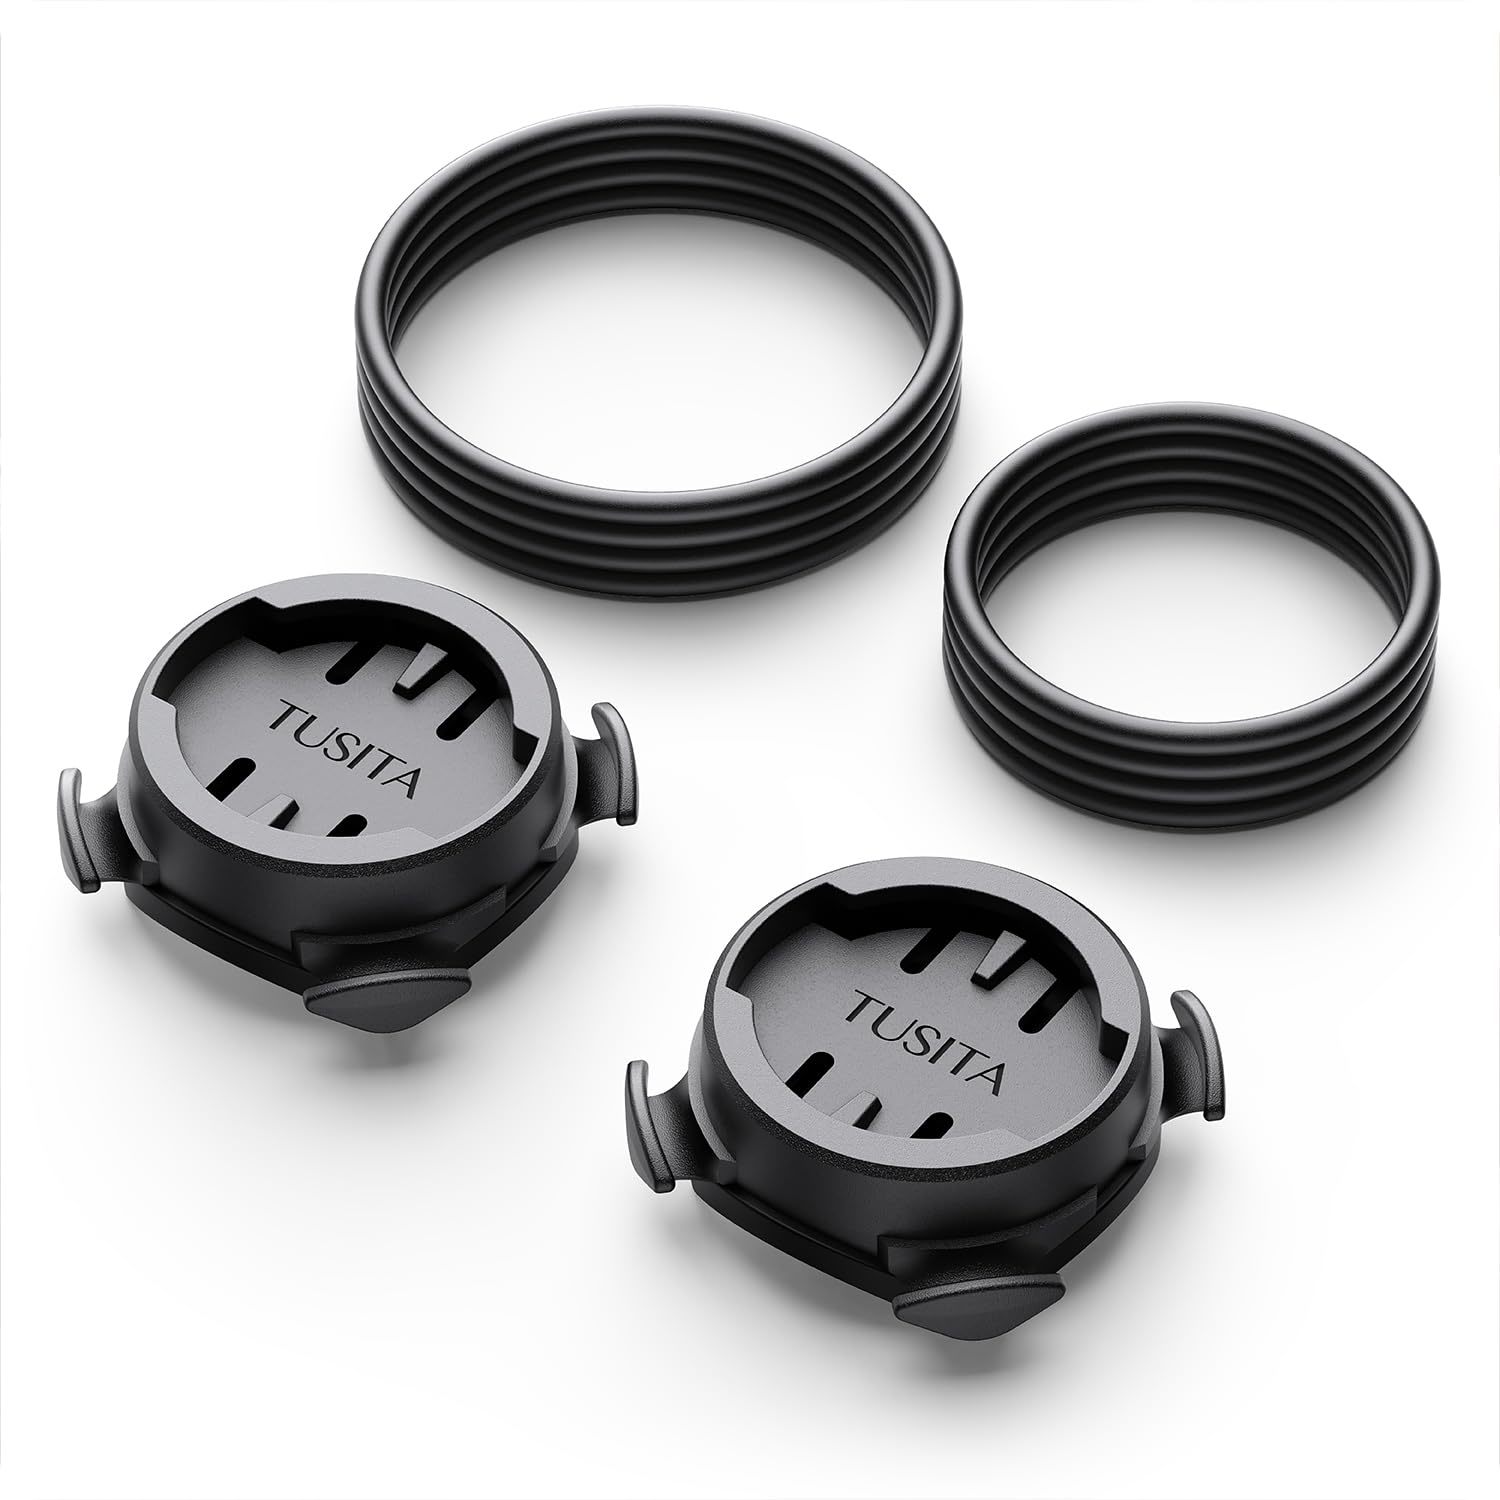 Primary image for Stem Mount Compatible With Wahoo Elemnt Bike Computer, 2-Pack